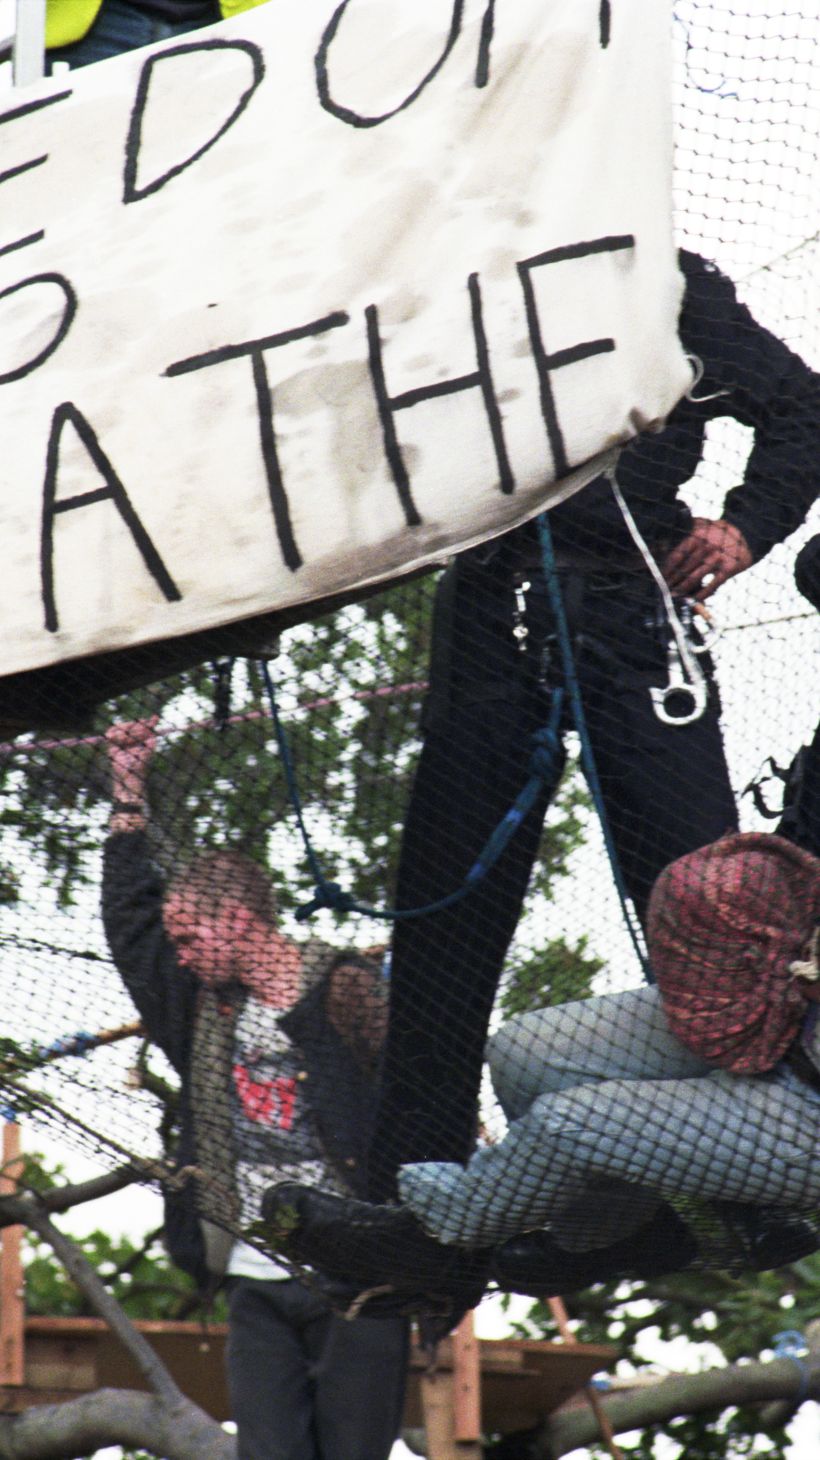 A protestor is tackled in a mesh net in East London